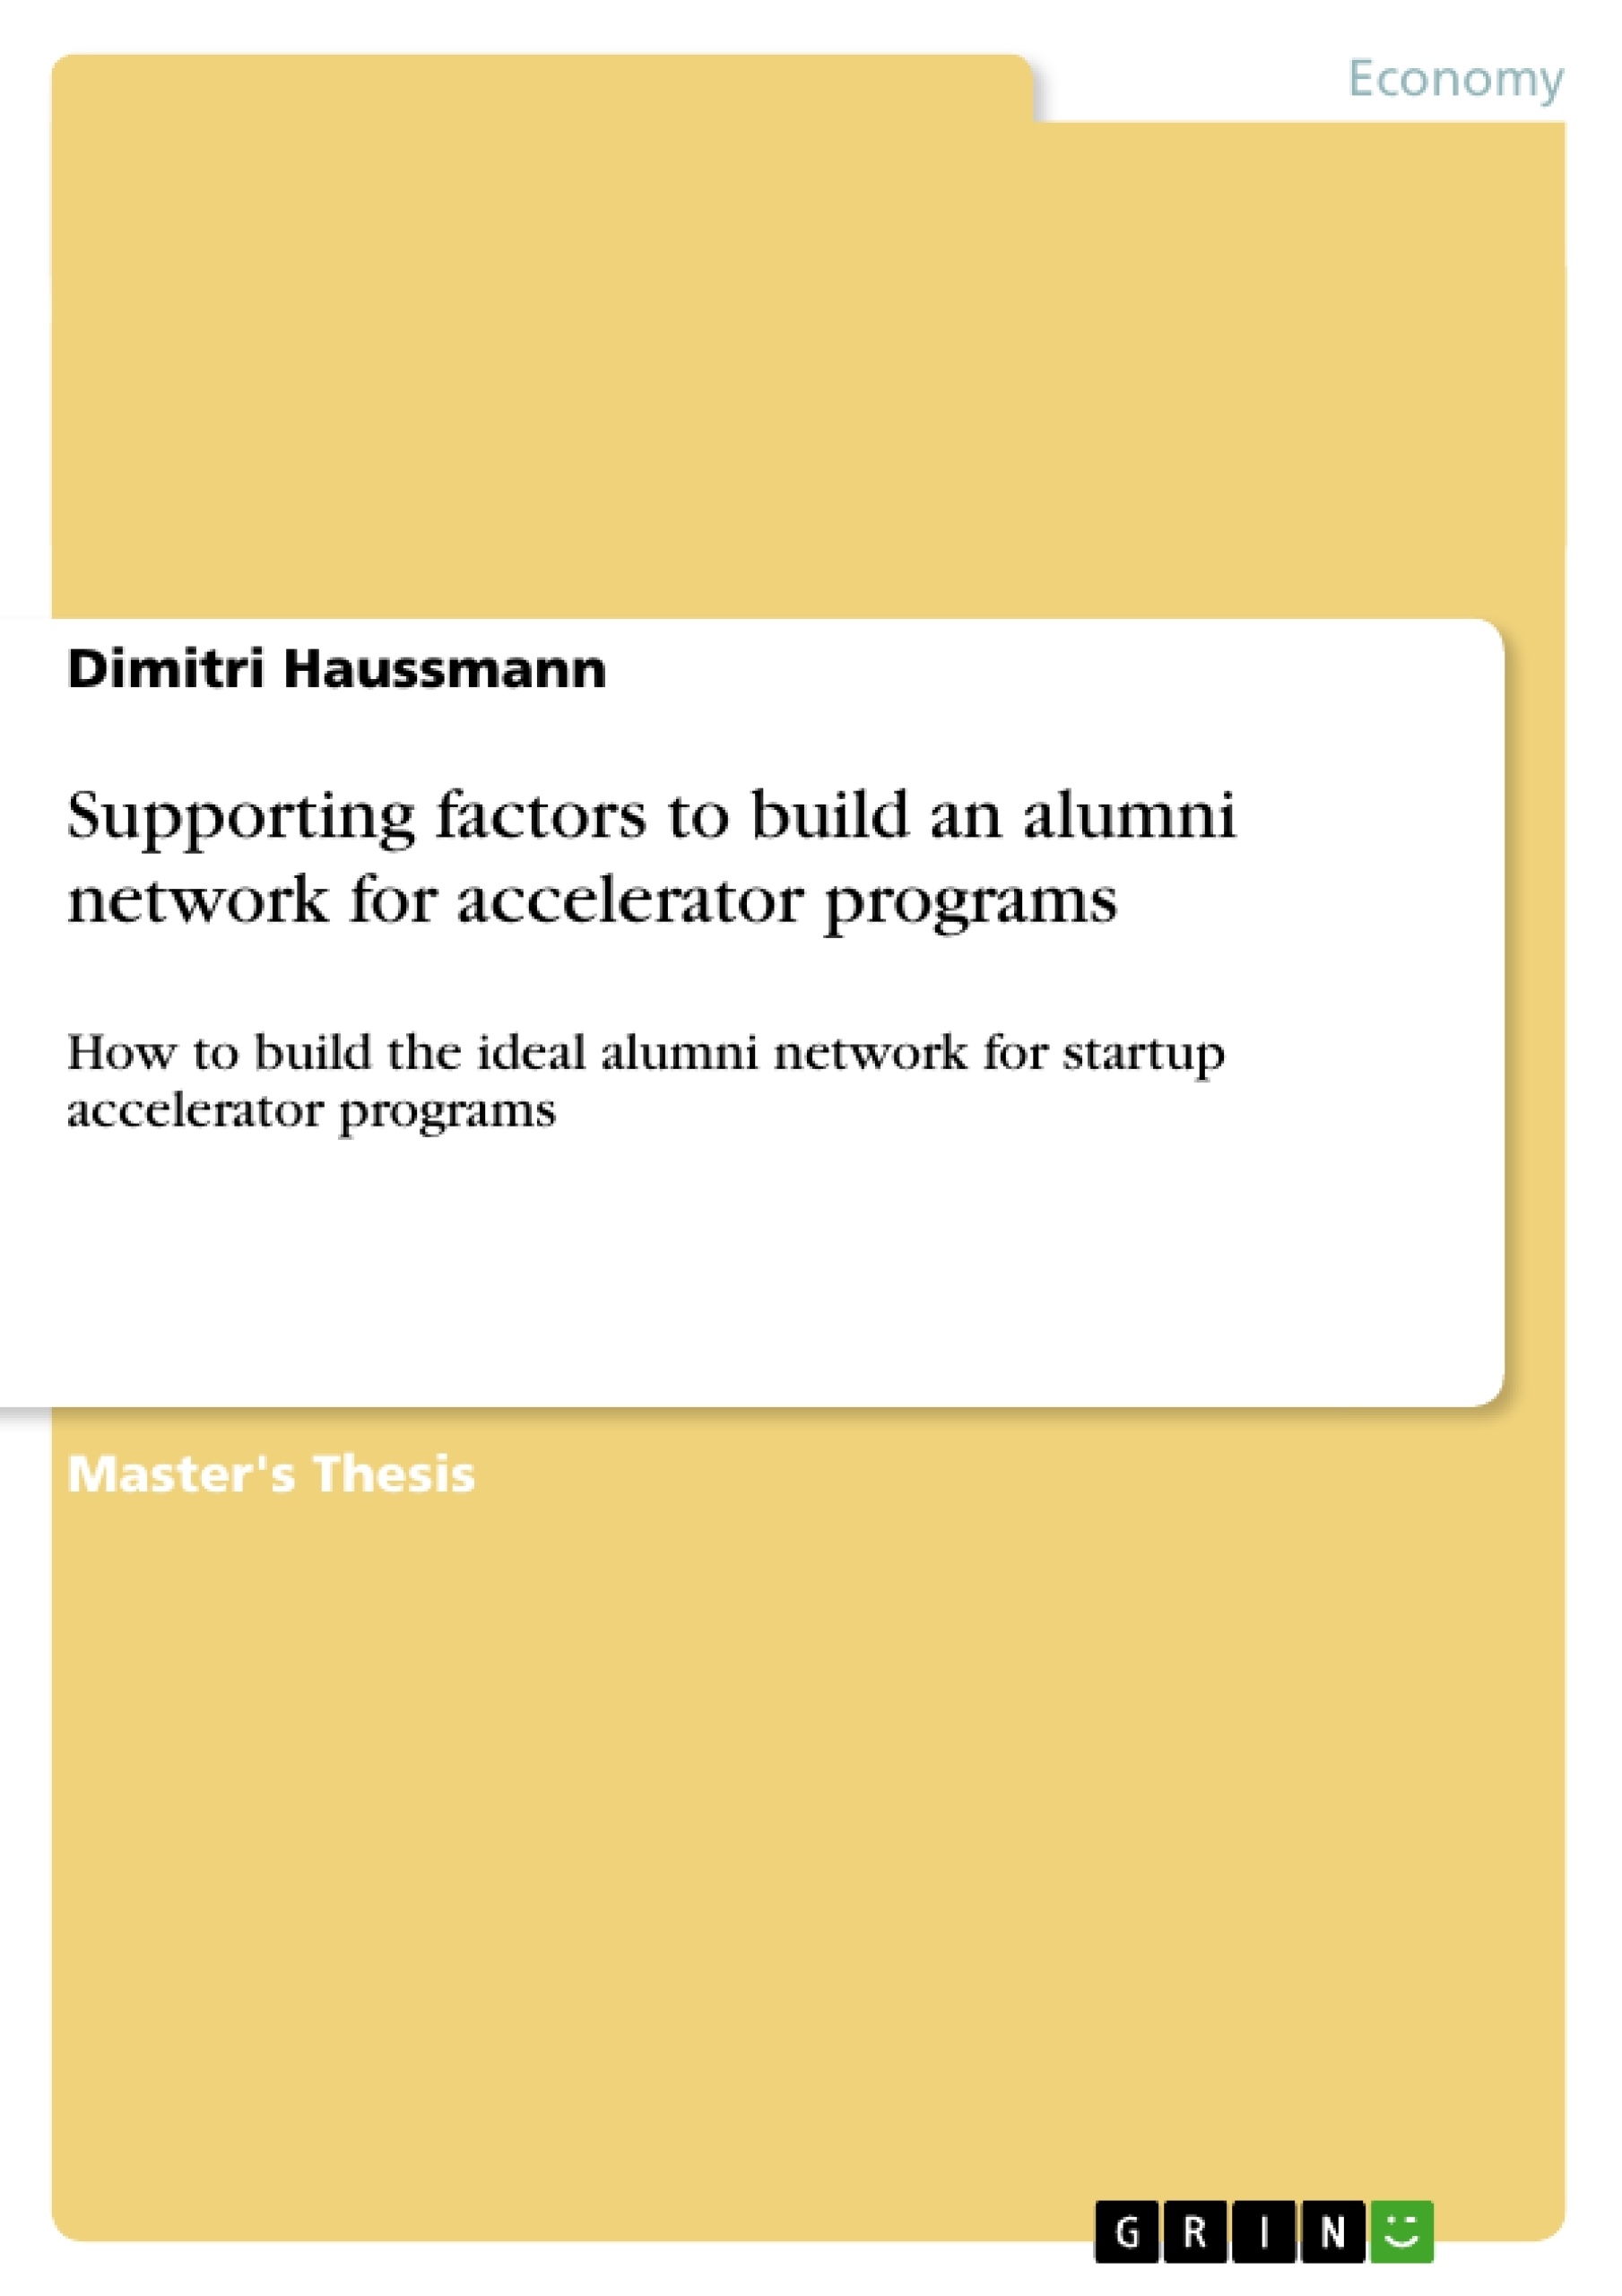 Title: Supporting factors to build an alumni network for accelerator programs